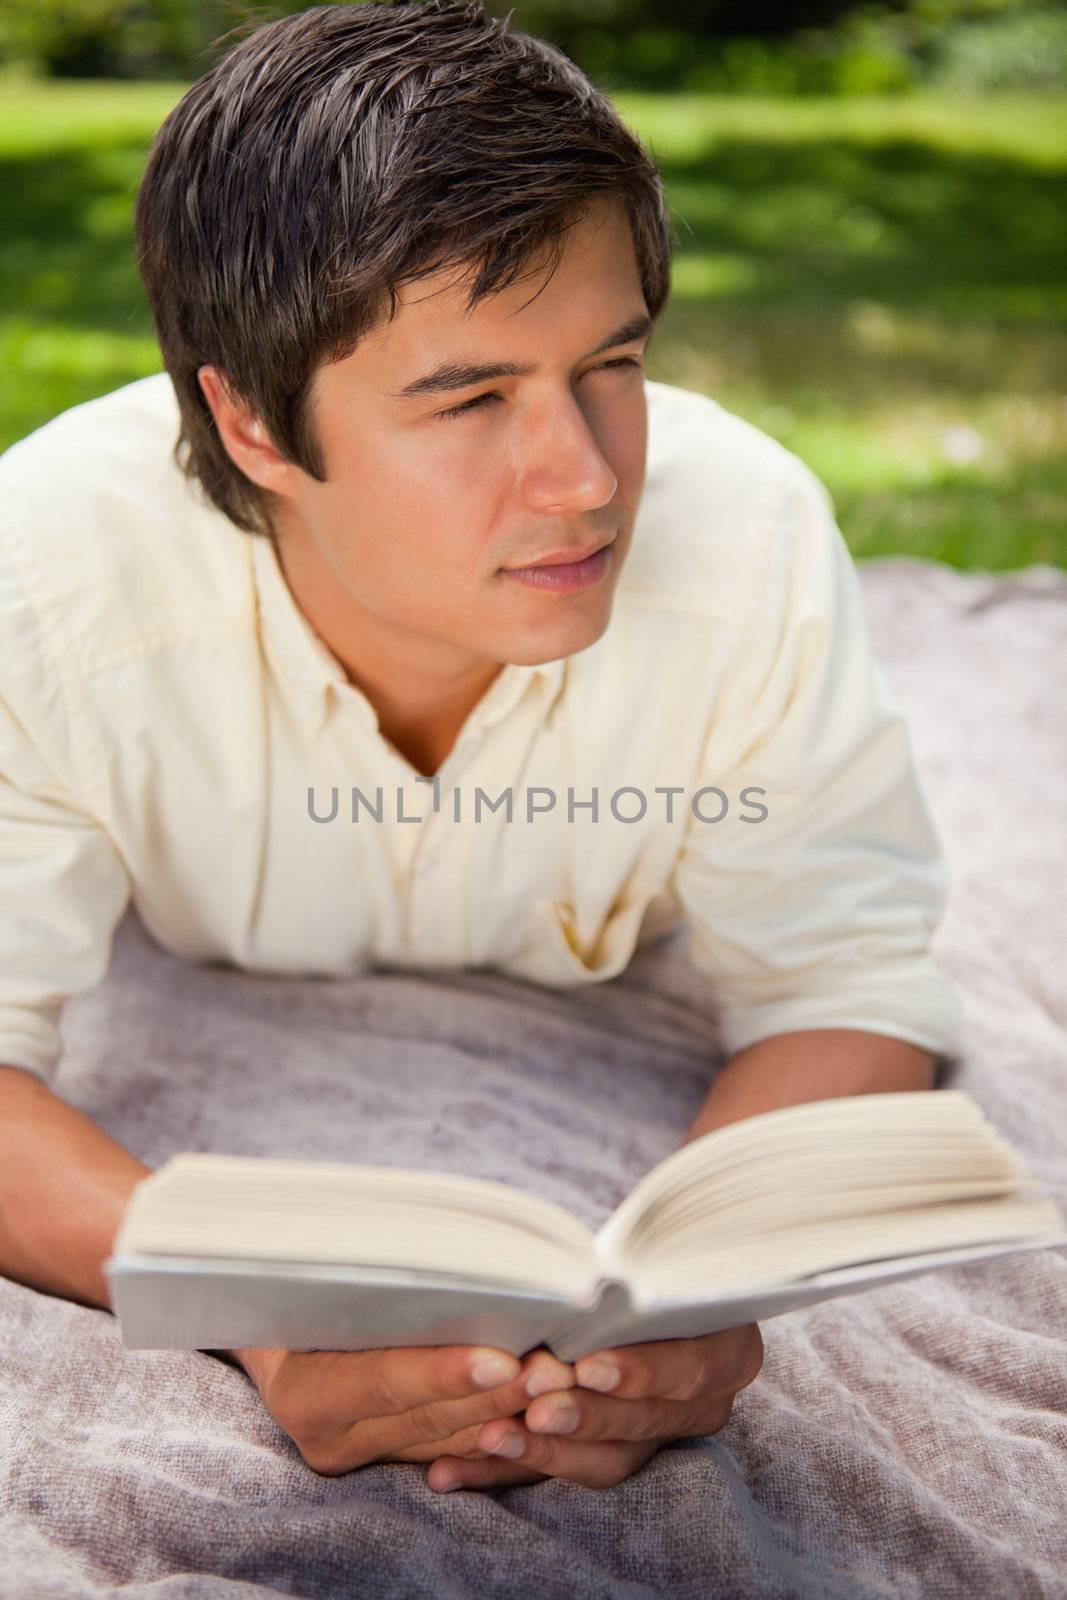 Man looking towards the side while reading a book as he lies on a grey blanket in the grass